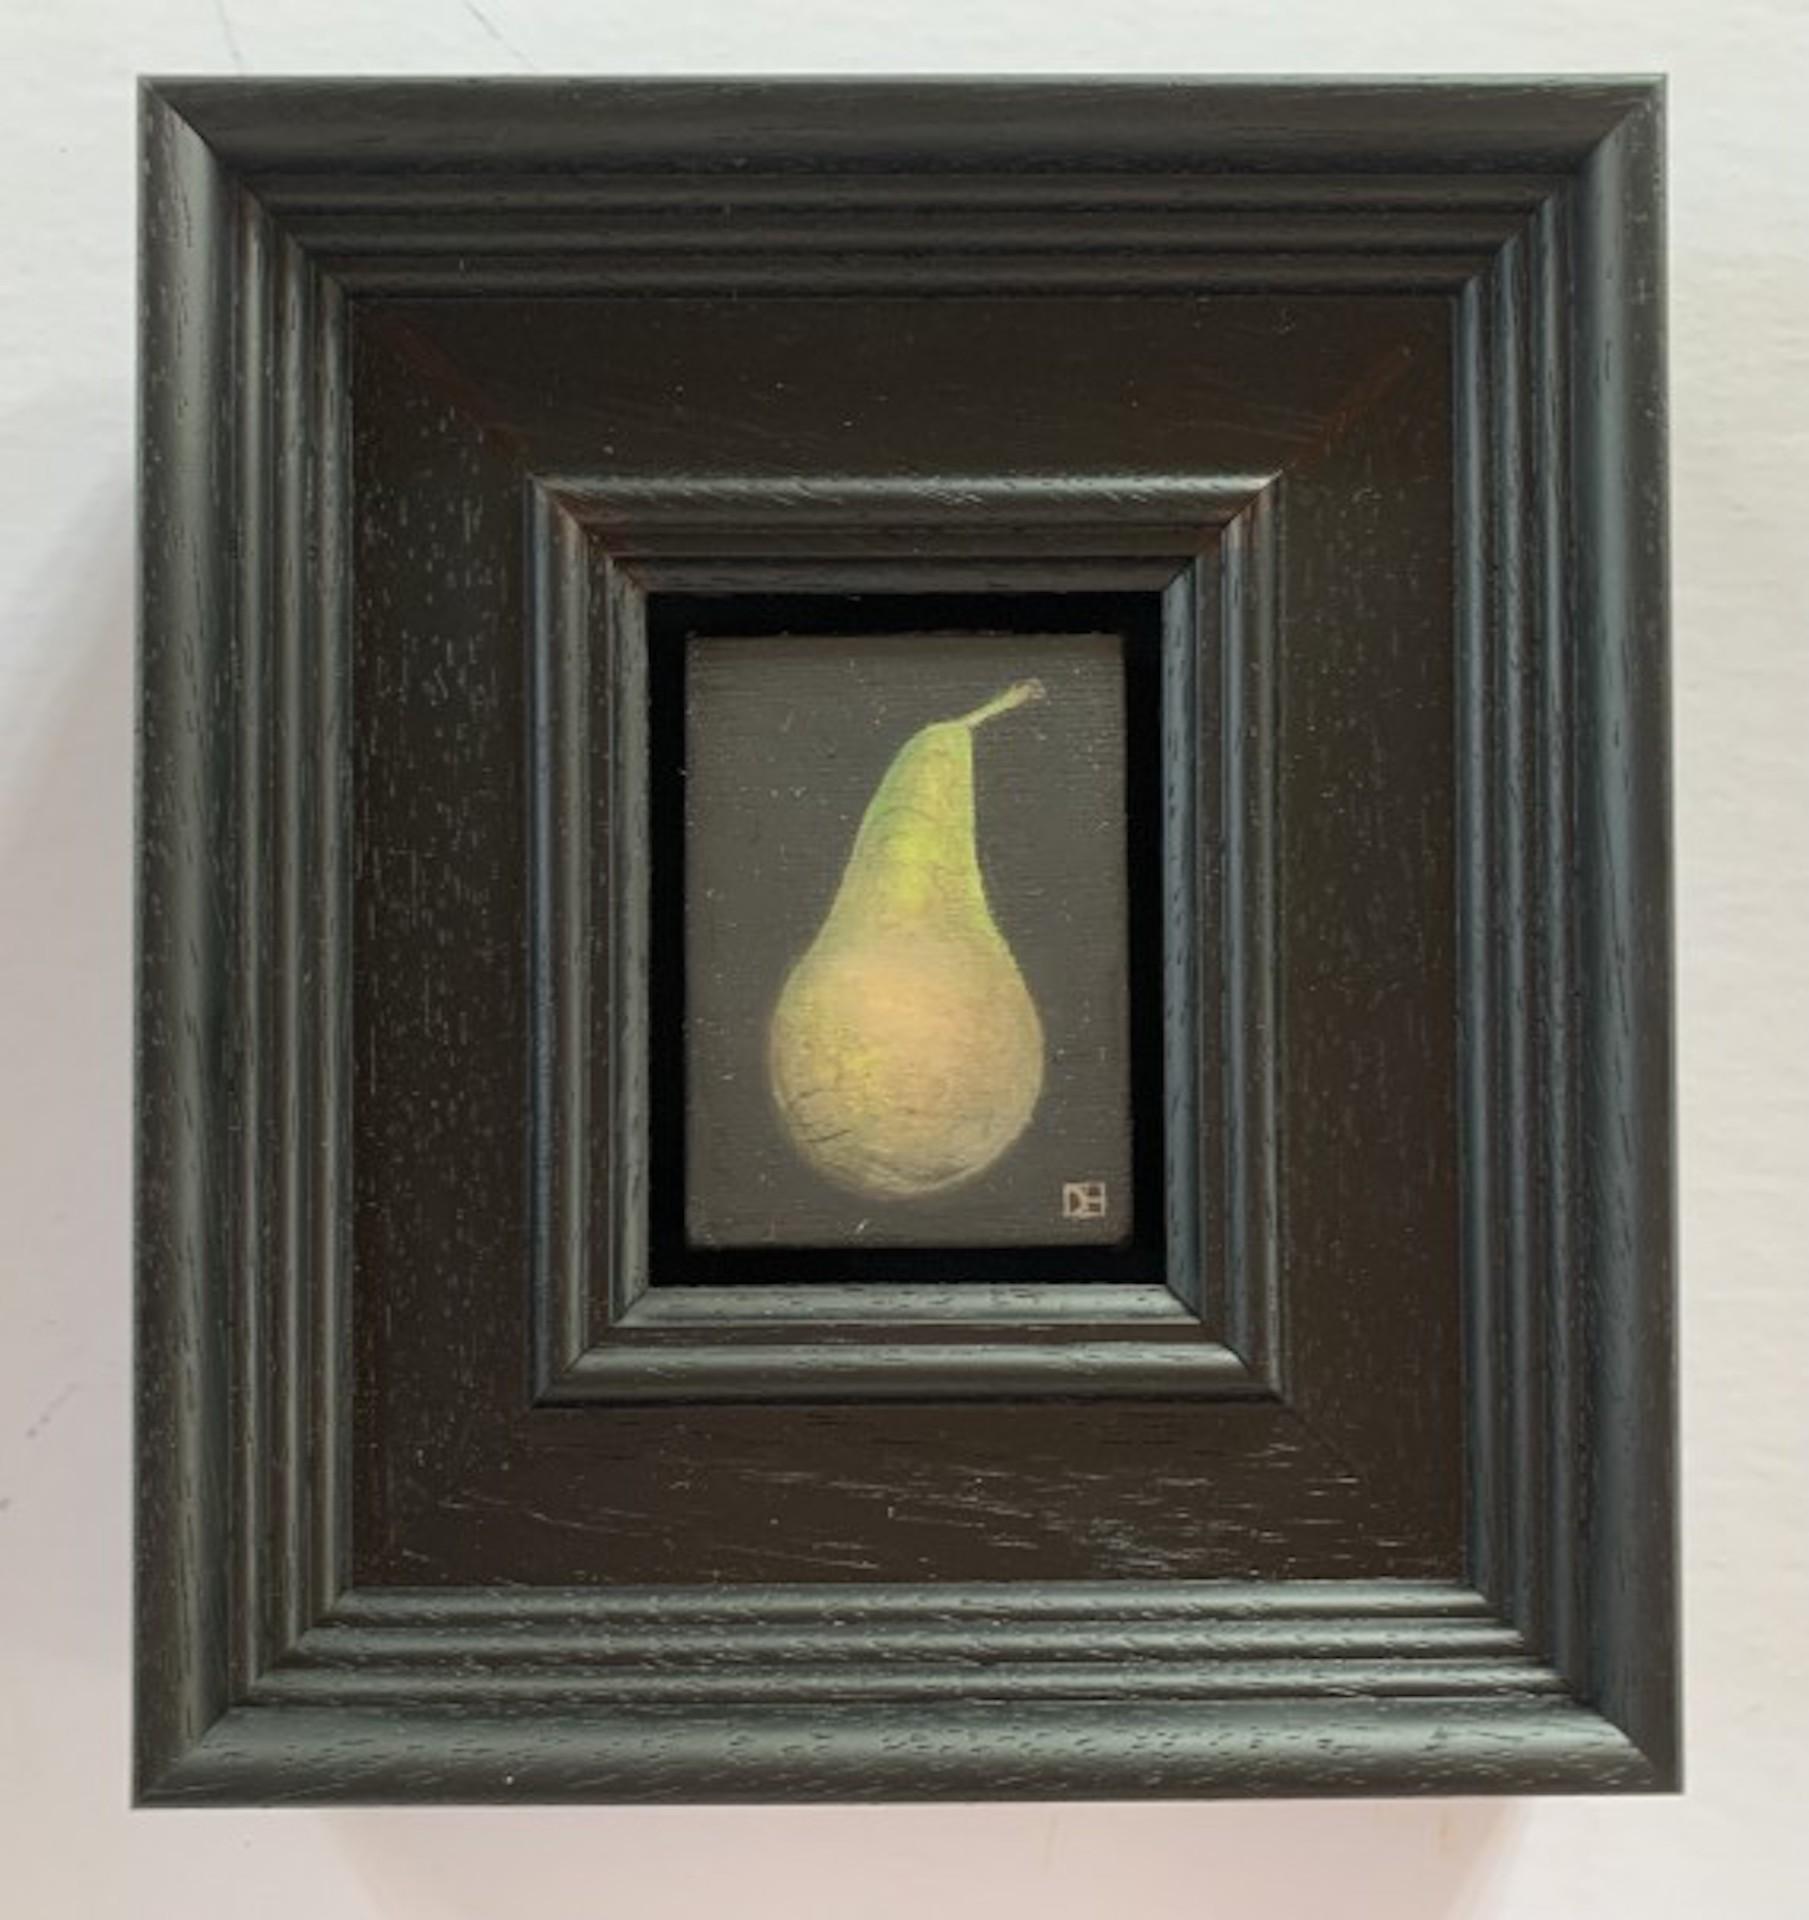 Pocket Conference Pear by Dani Humberstone [2021]
Original
Oil Paint on Canvas
Image size: H:7.5 cm x W:5 cm
Complete Size of Unframed Work: H:7.5 cm x W:5 cm x D:2cm
Framed Size: H:18.5 cm x W:16.5 cm x D:3.5cm
Sold Framed
Please note that insitu